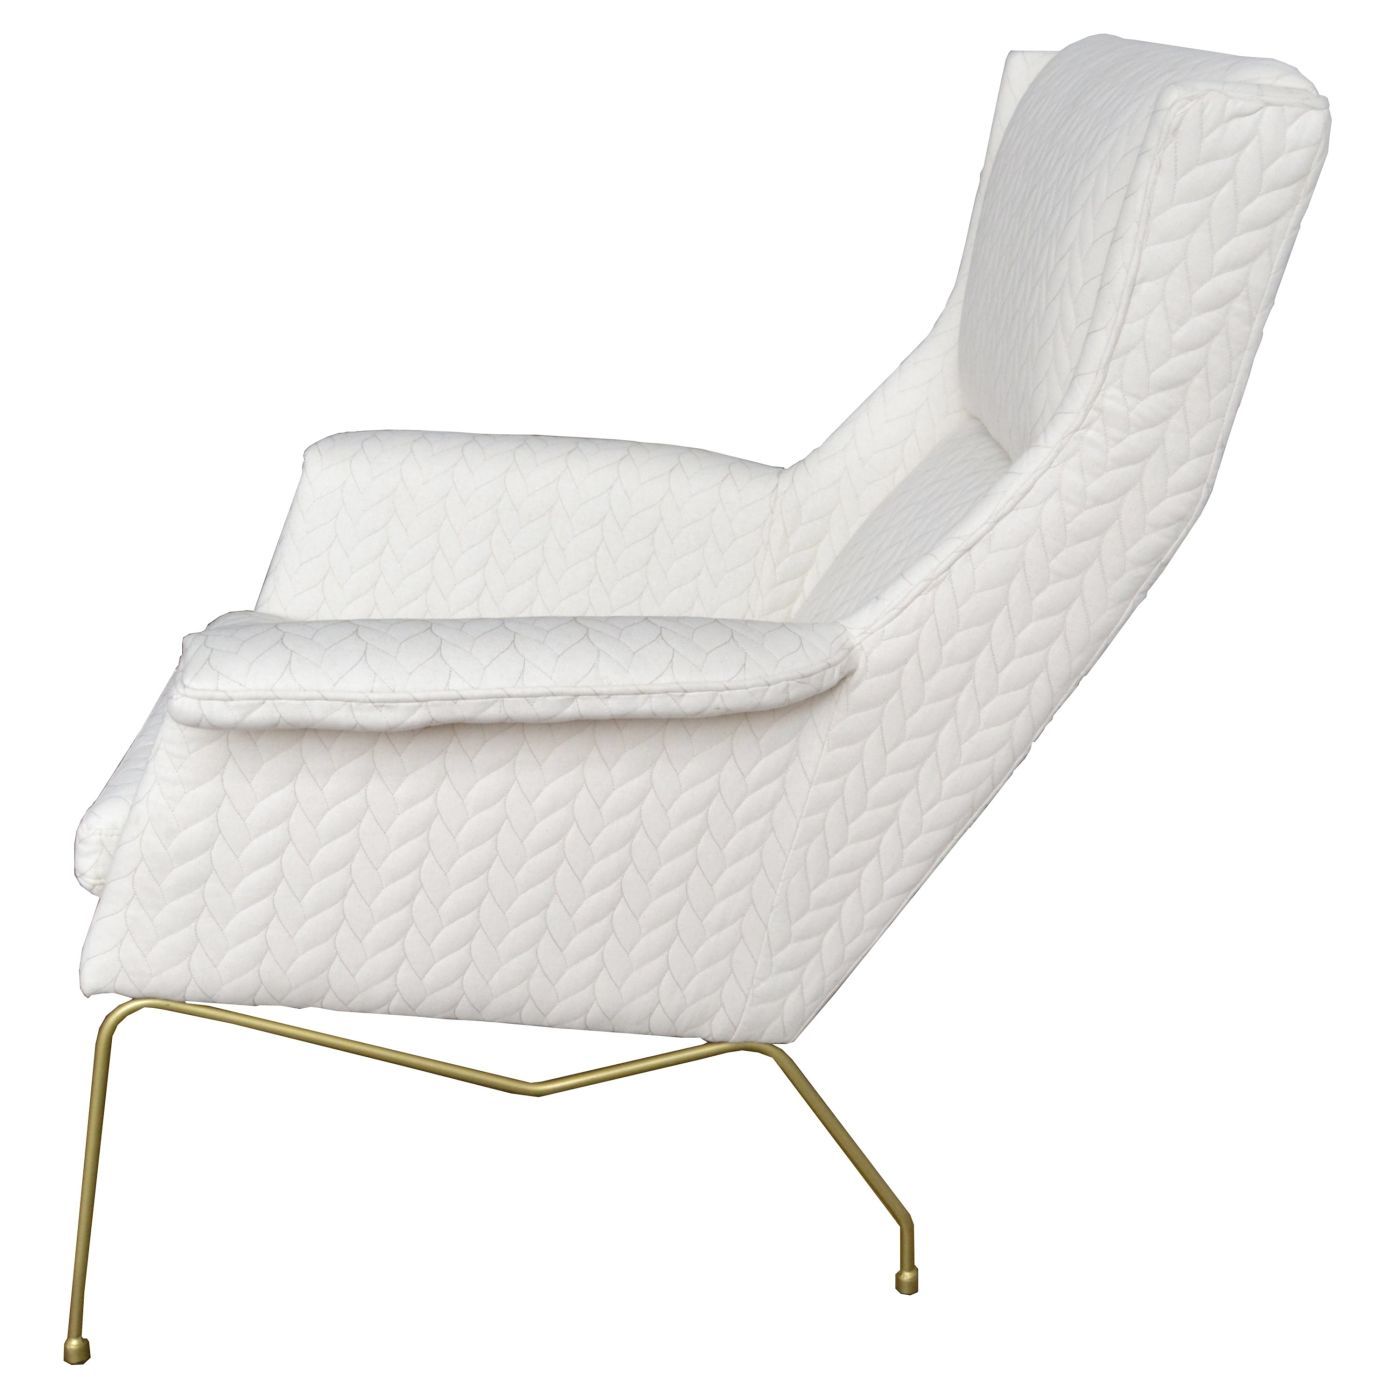 Evian Arm Chair, Icy Leafage Beige by New Pacific Direct | 9900008